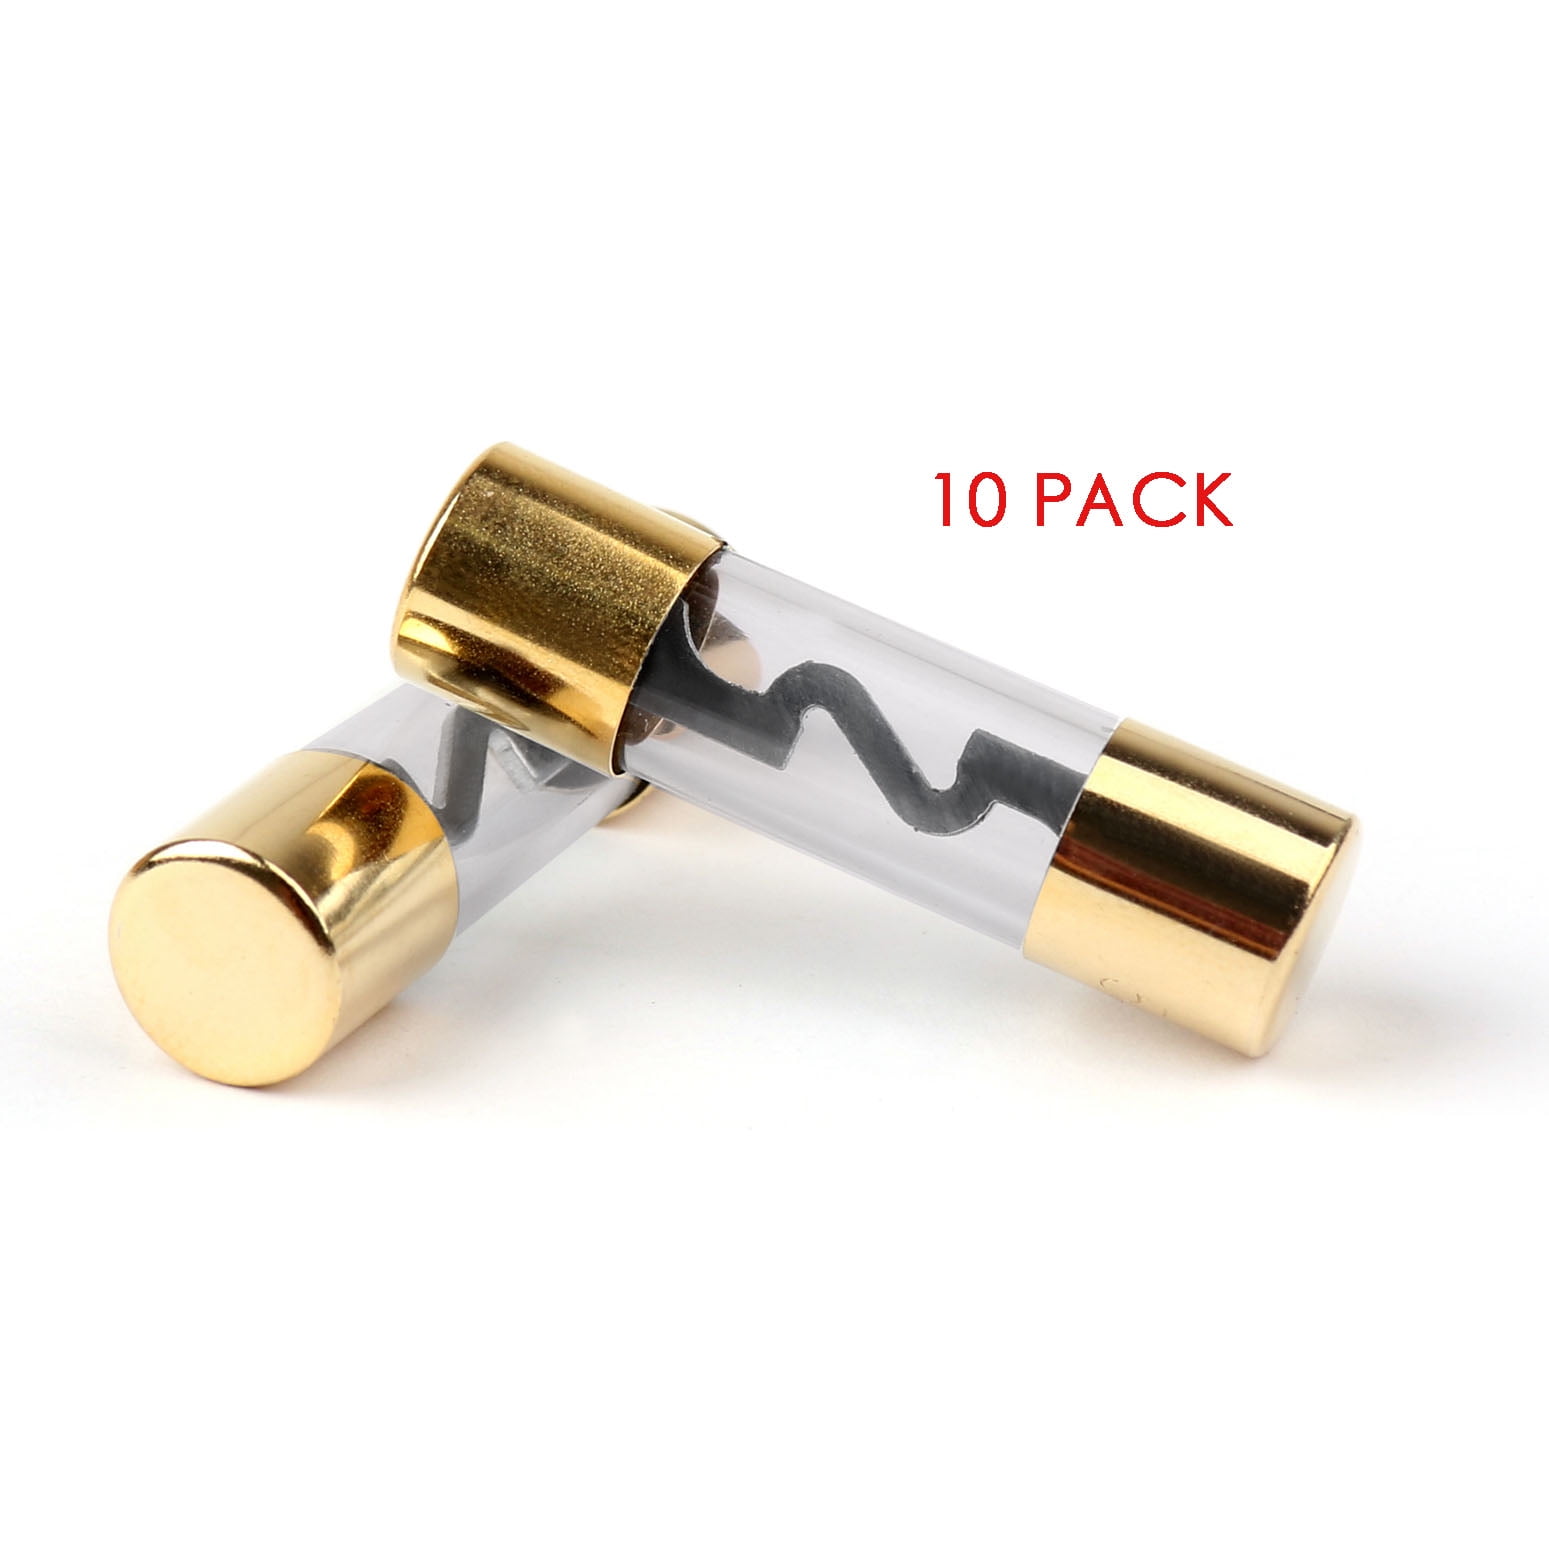 10 Pack Gold Plated Glass Car Audio Amp Inline AGU Fuse 50 Amp 